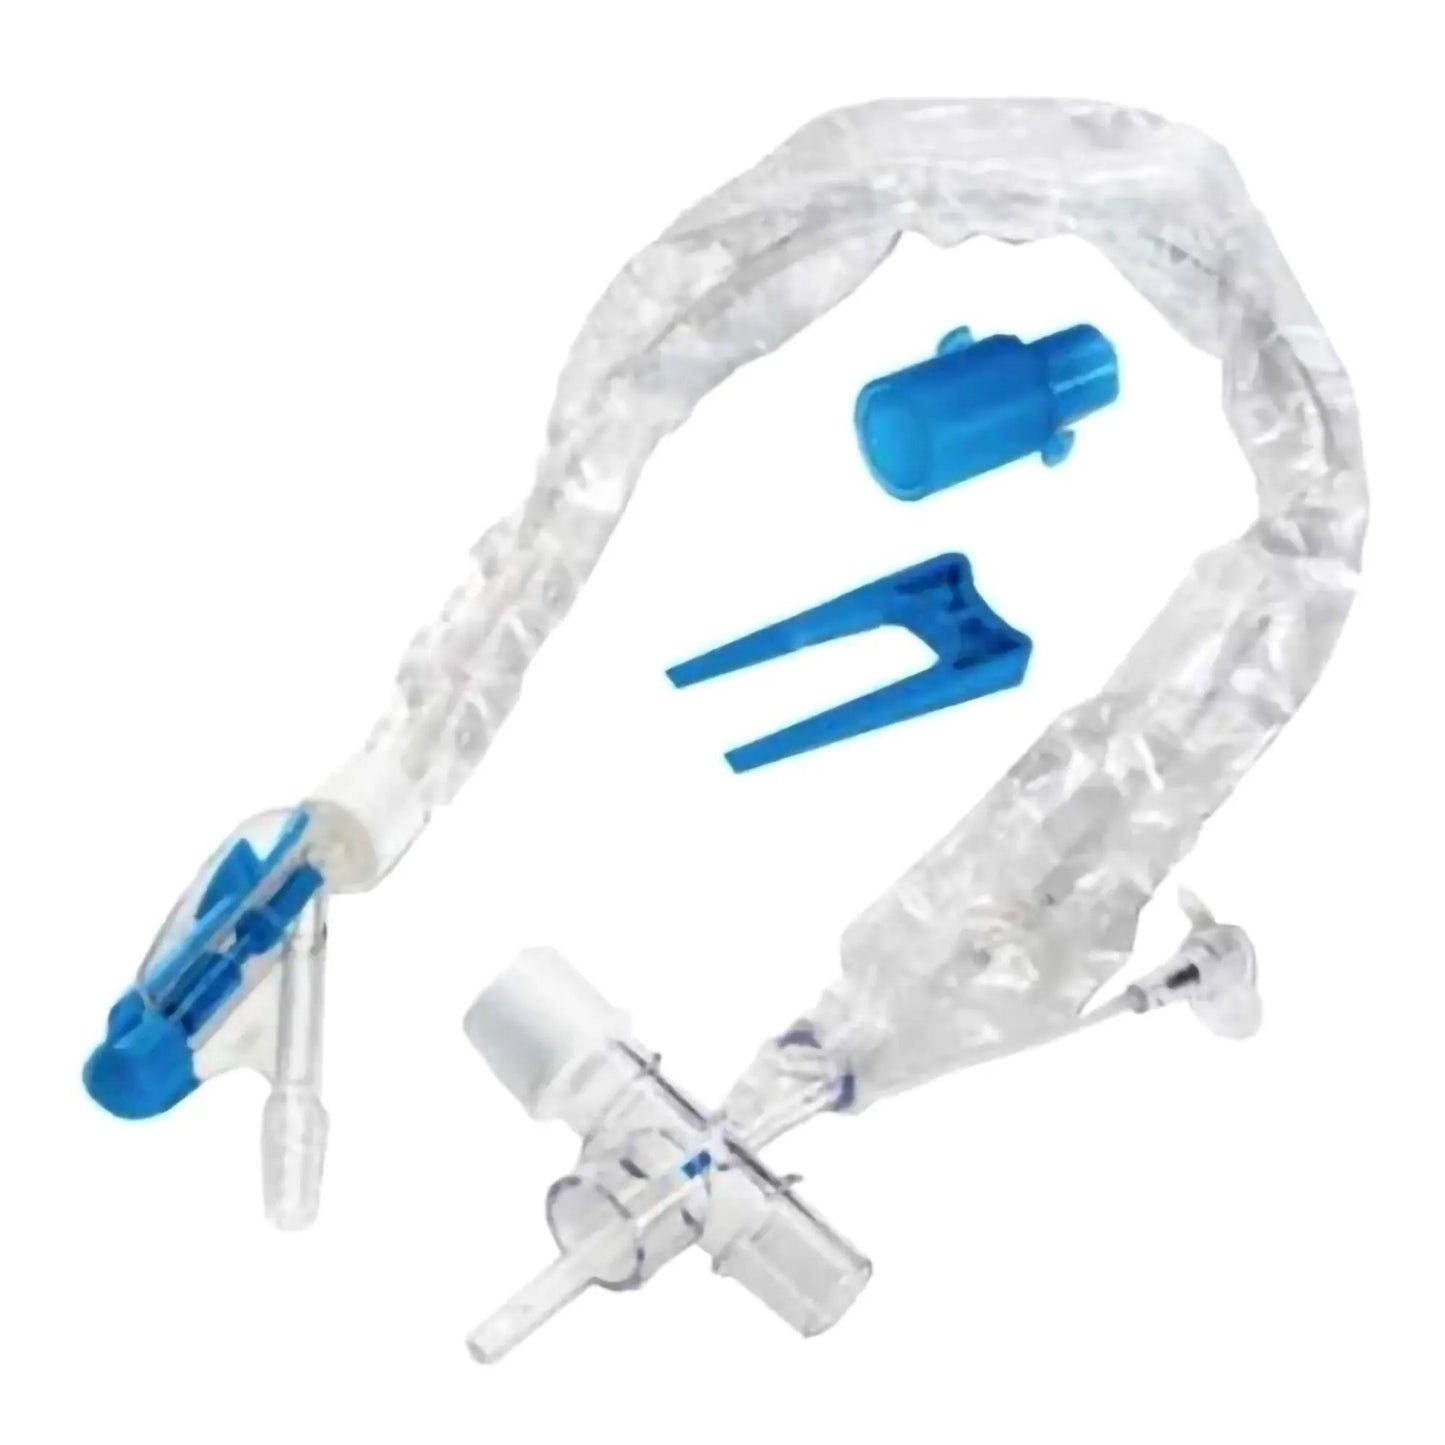 SuctionPro 72 Suction Probe With One-Way Valve